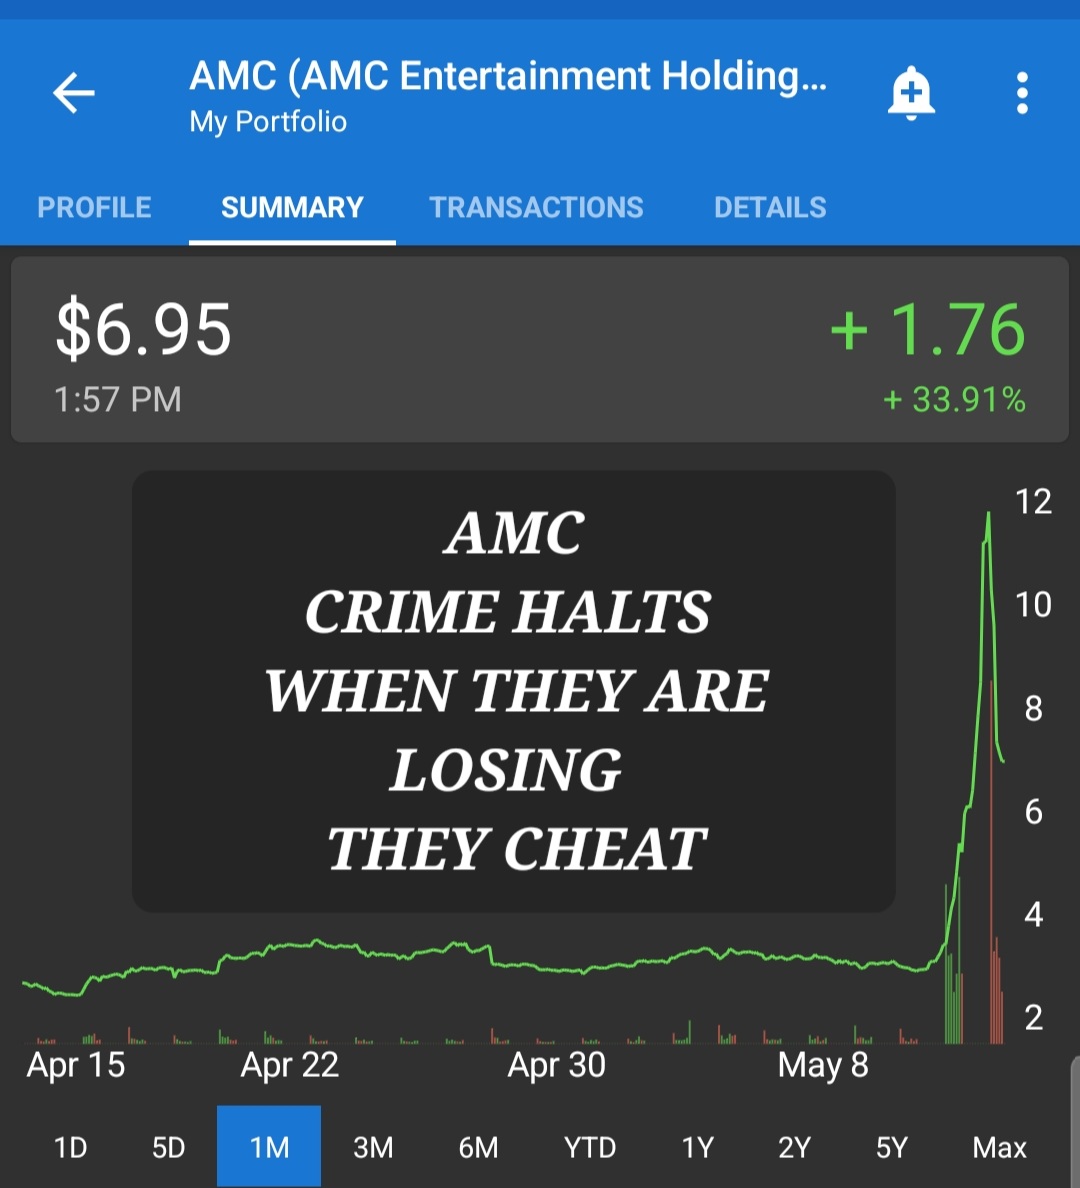 #AMC CRIME HALTS
When they are losing they cheat. 
Is this really a free and fair market.
The answer is hell no. The manipulation is so blatant even a blind person can see it.